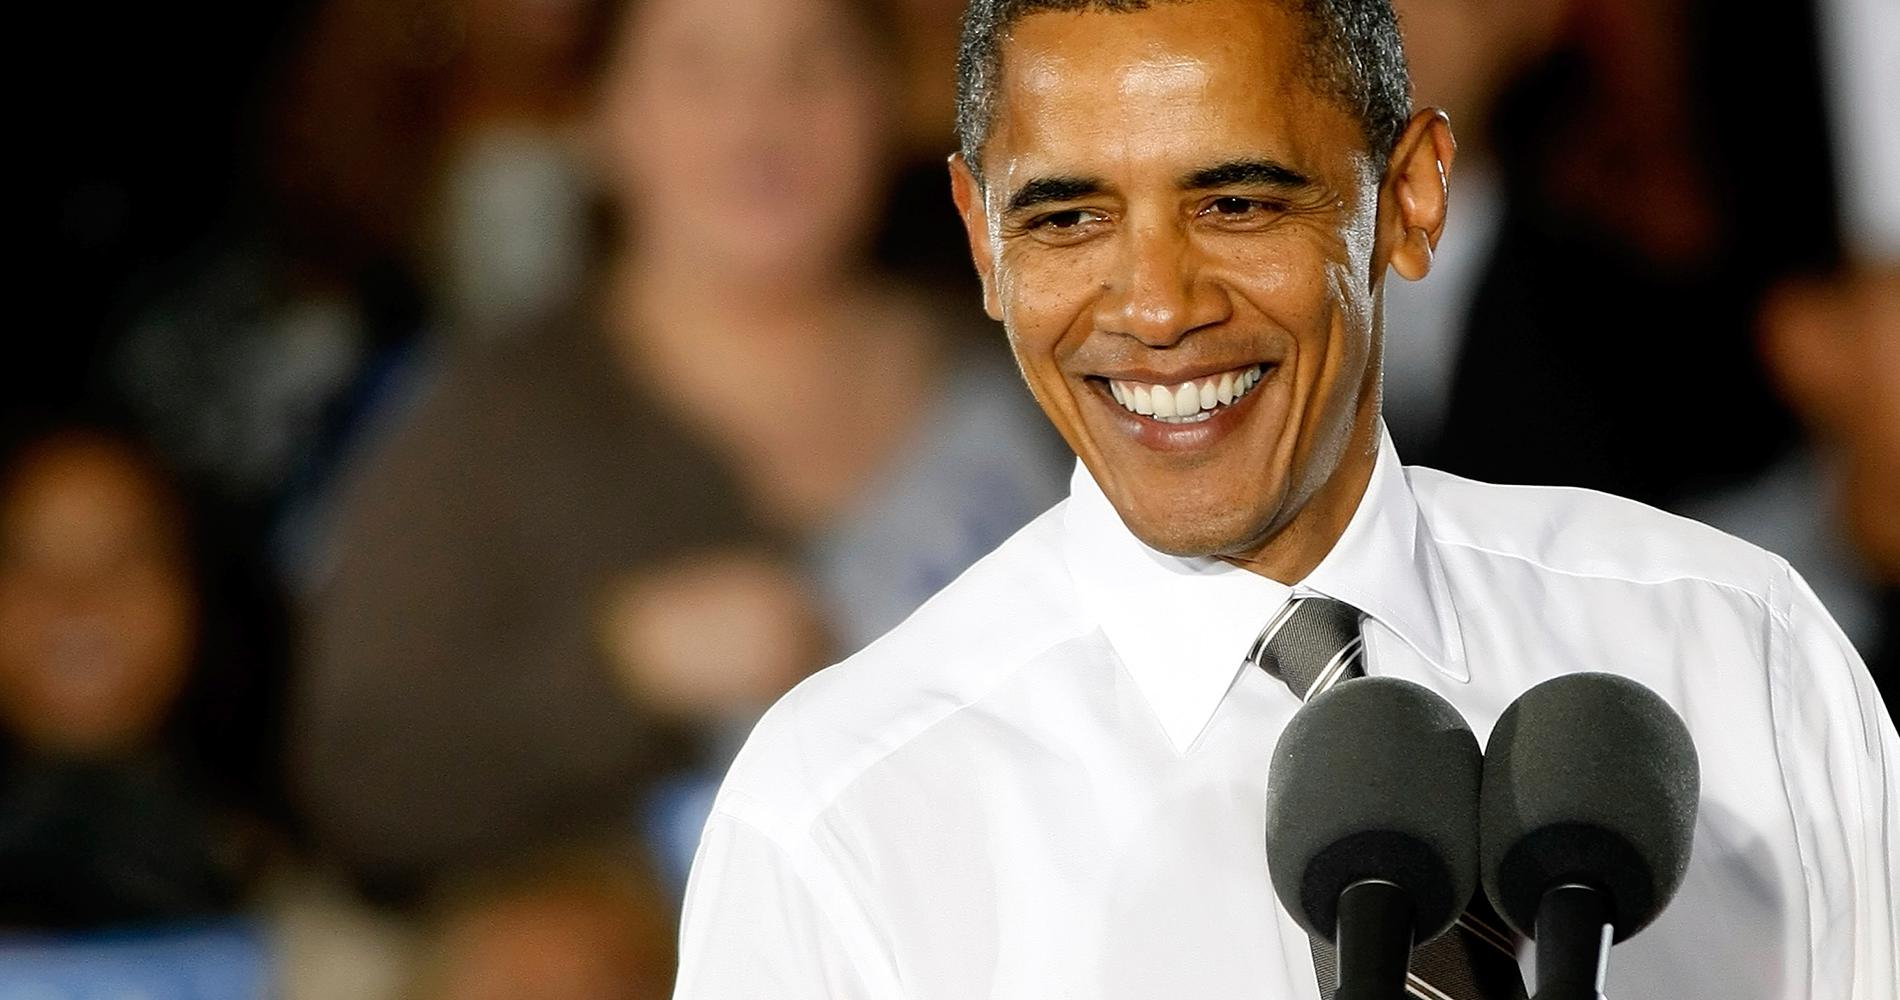 Obama Reaches Out to 18 to 34 Year Old “Young Invincibles” & Other Uninsured